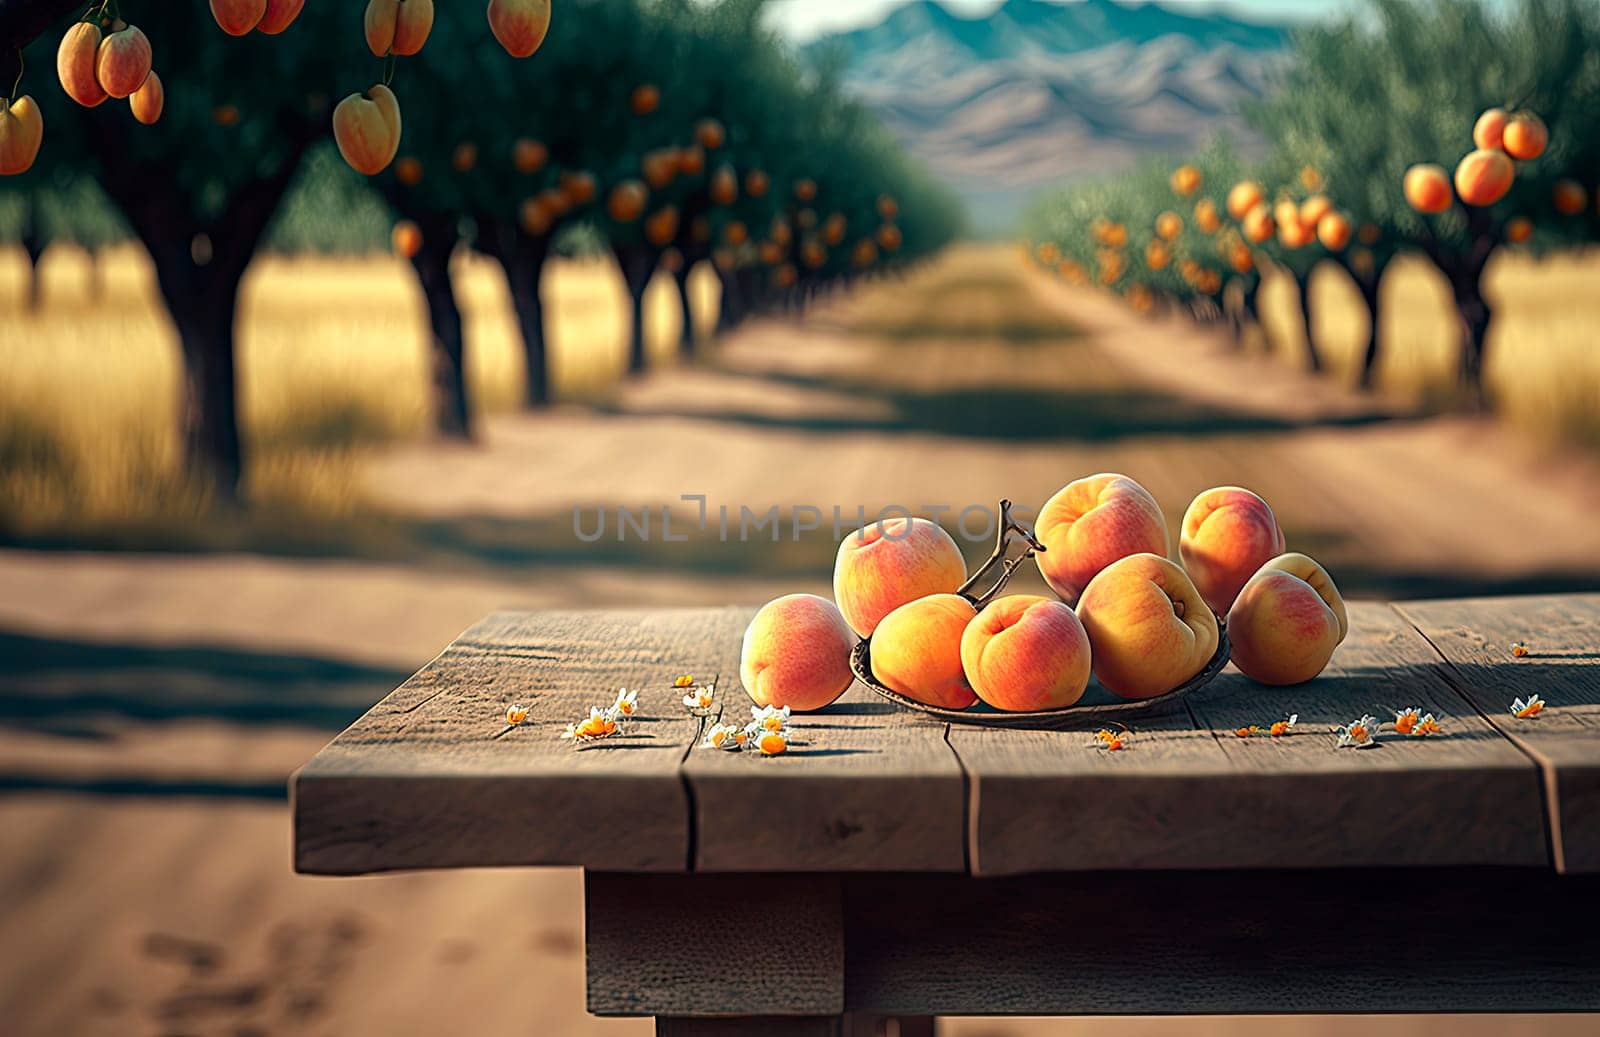 peaches on the table in the garden. by yanadjana